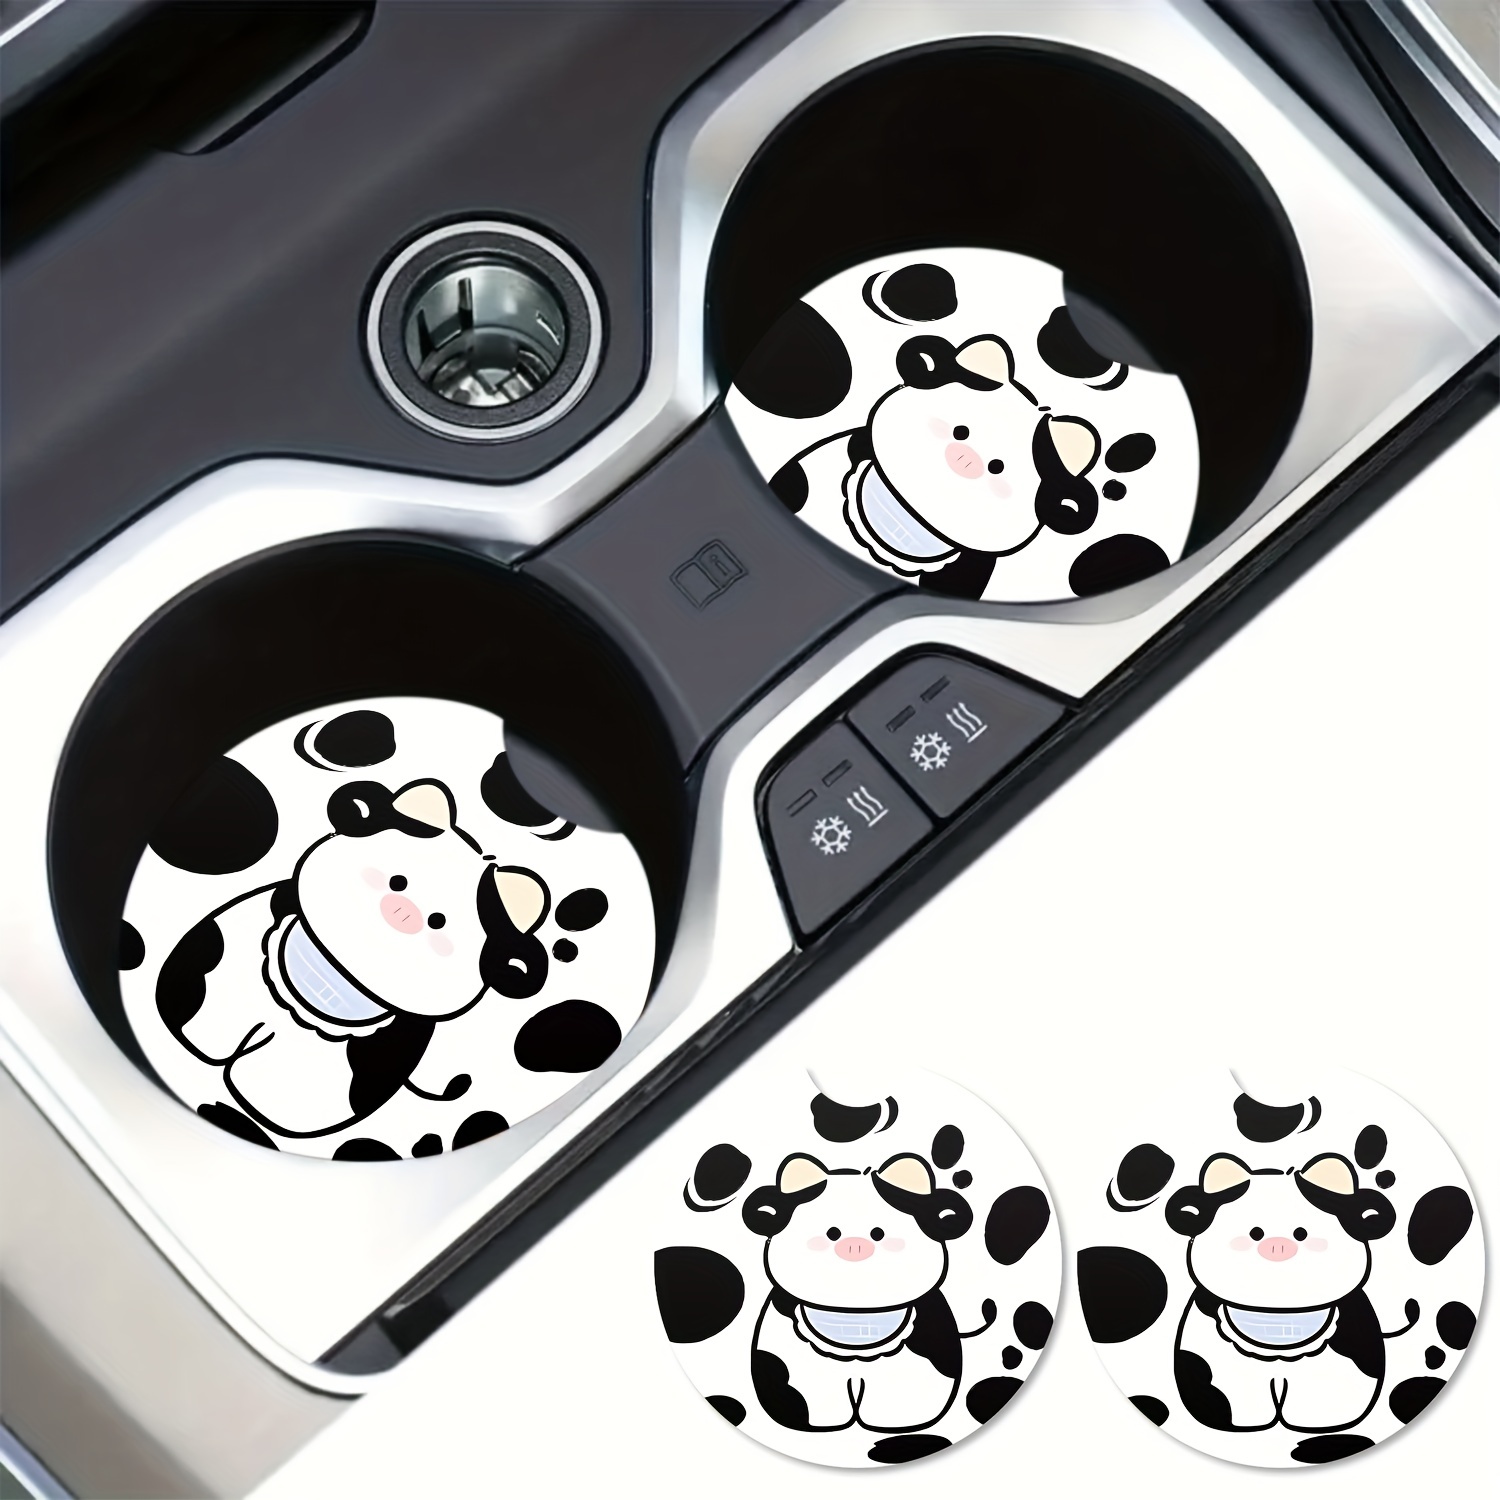 4 Pack Car Coasters,cow Printed Car Cup Holders,rubber Car Coasters